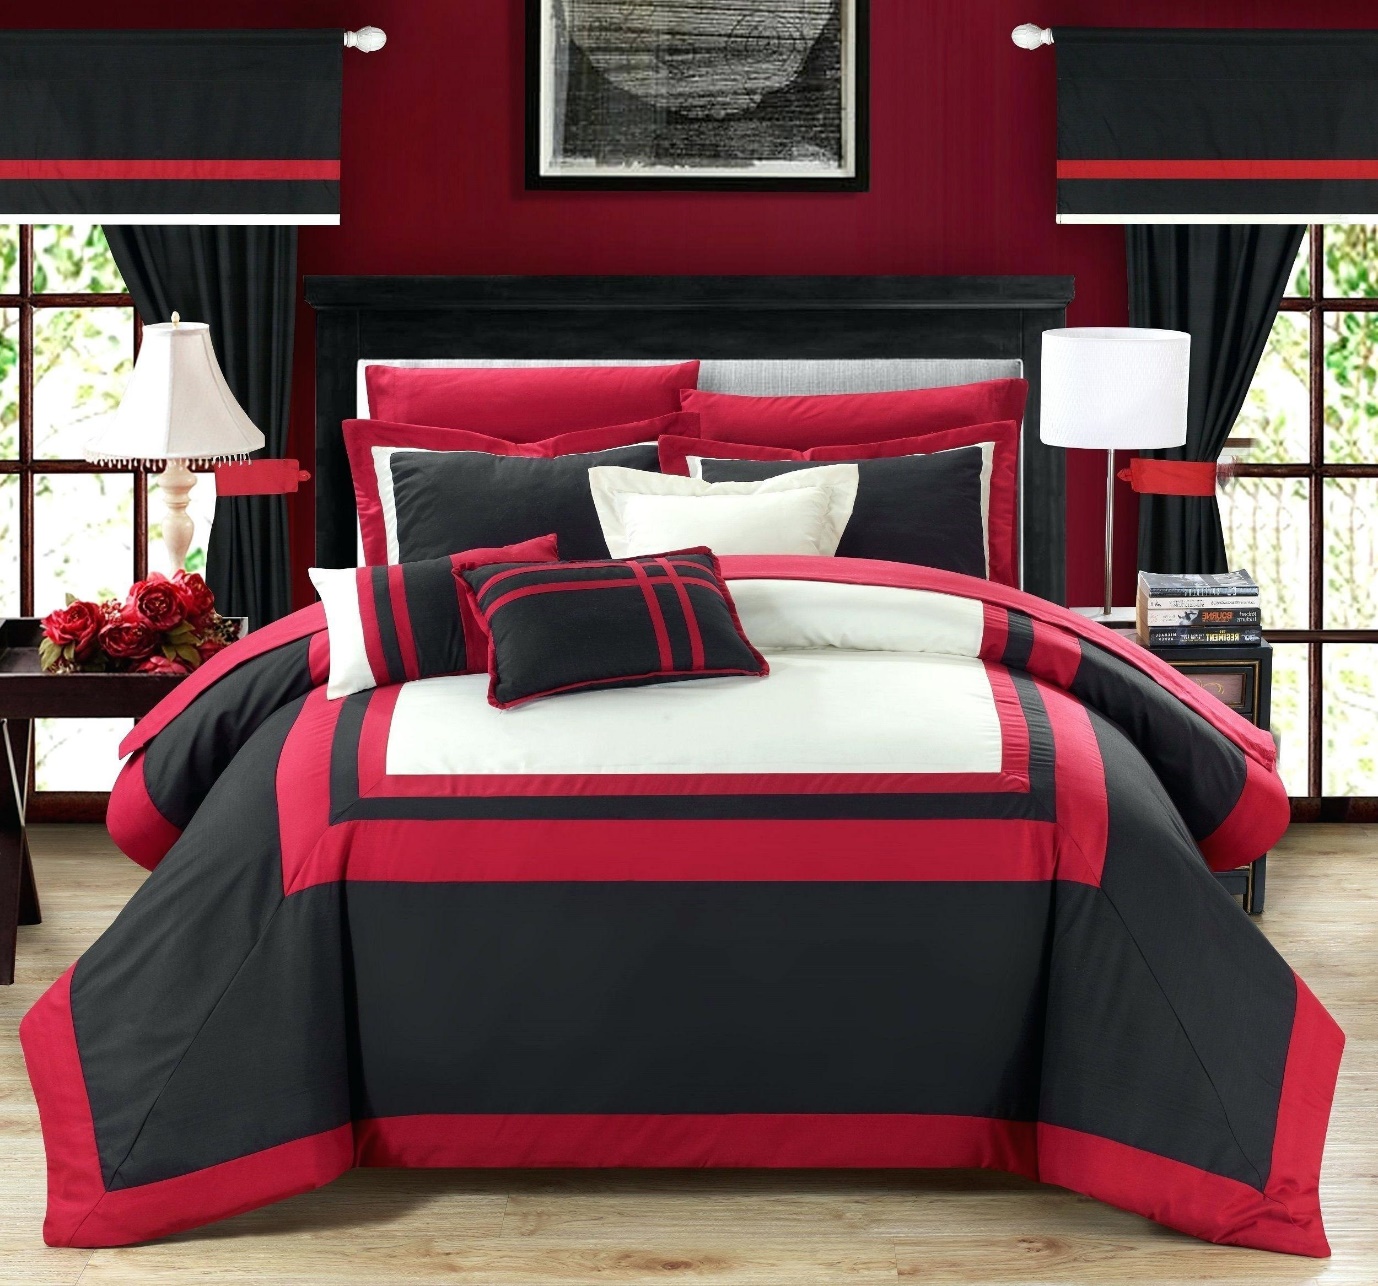 25 Exceptional Red Bedroom Ideas to Have This Year